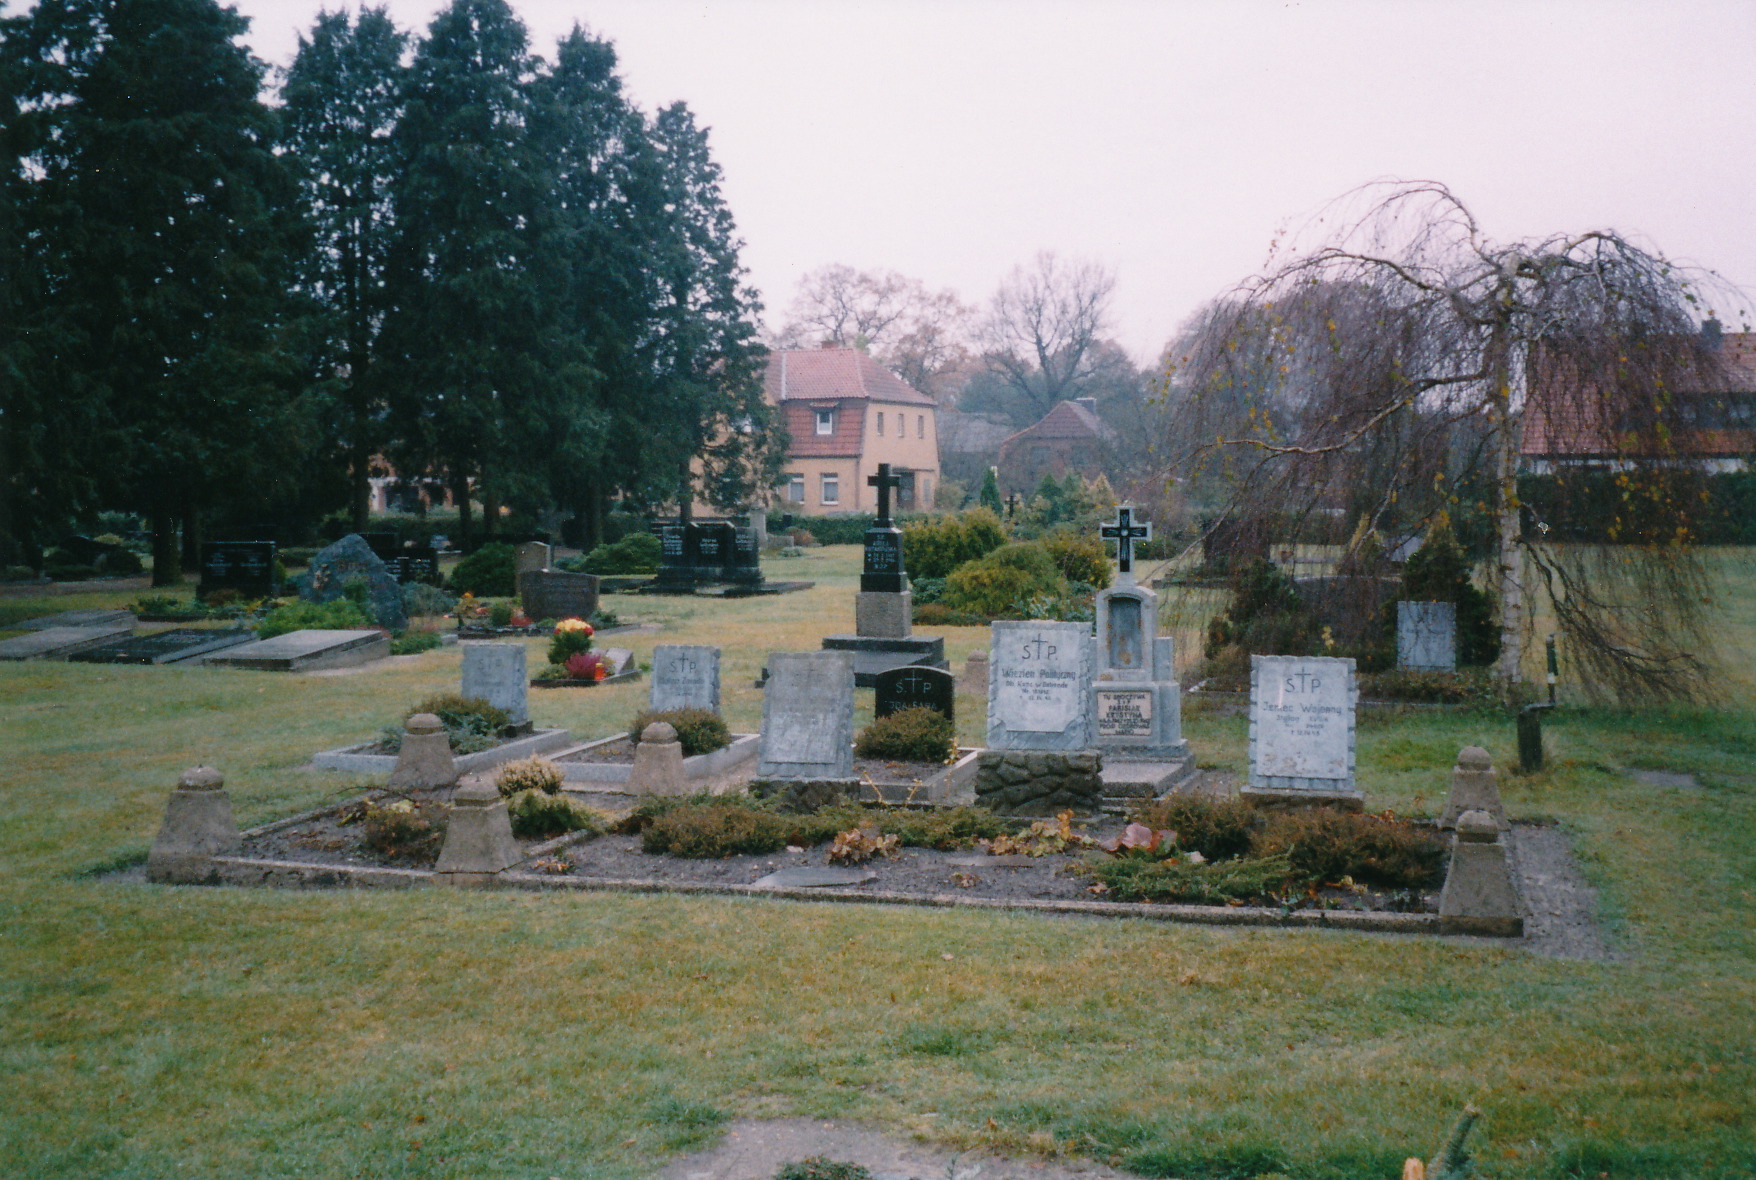 Polish burial ground at the cemetery in Ehra-Lessien